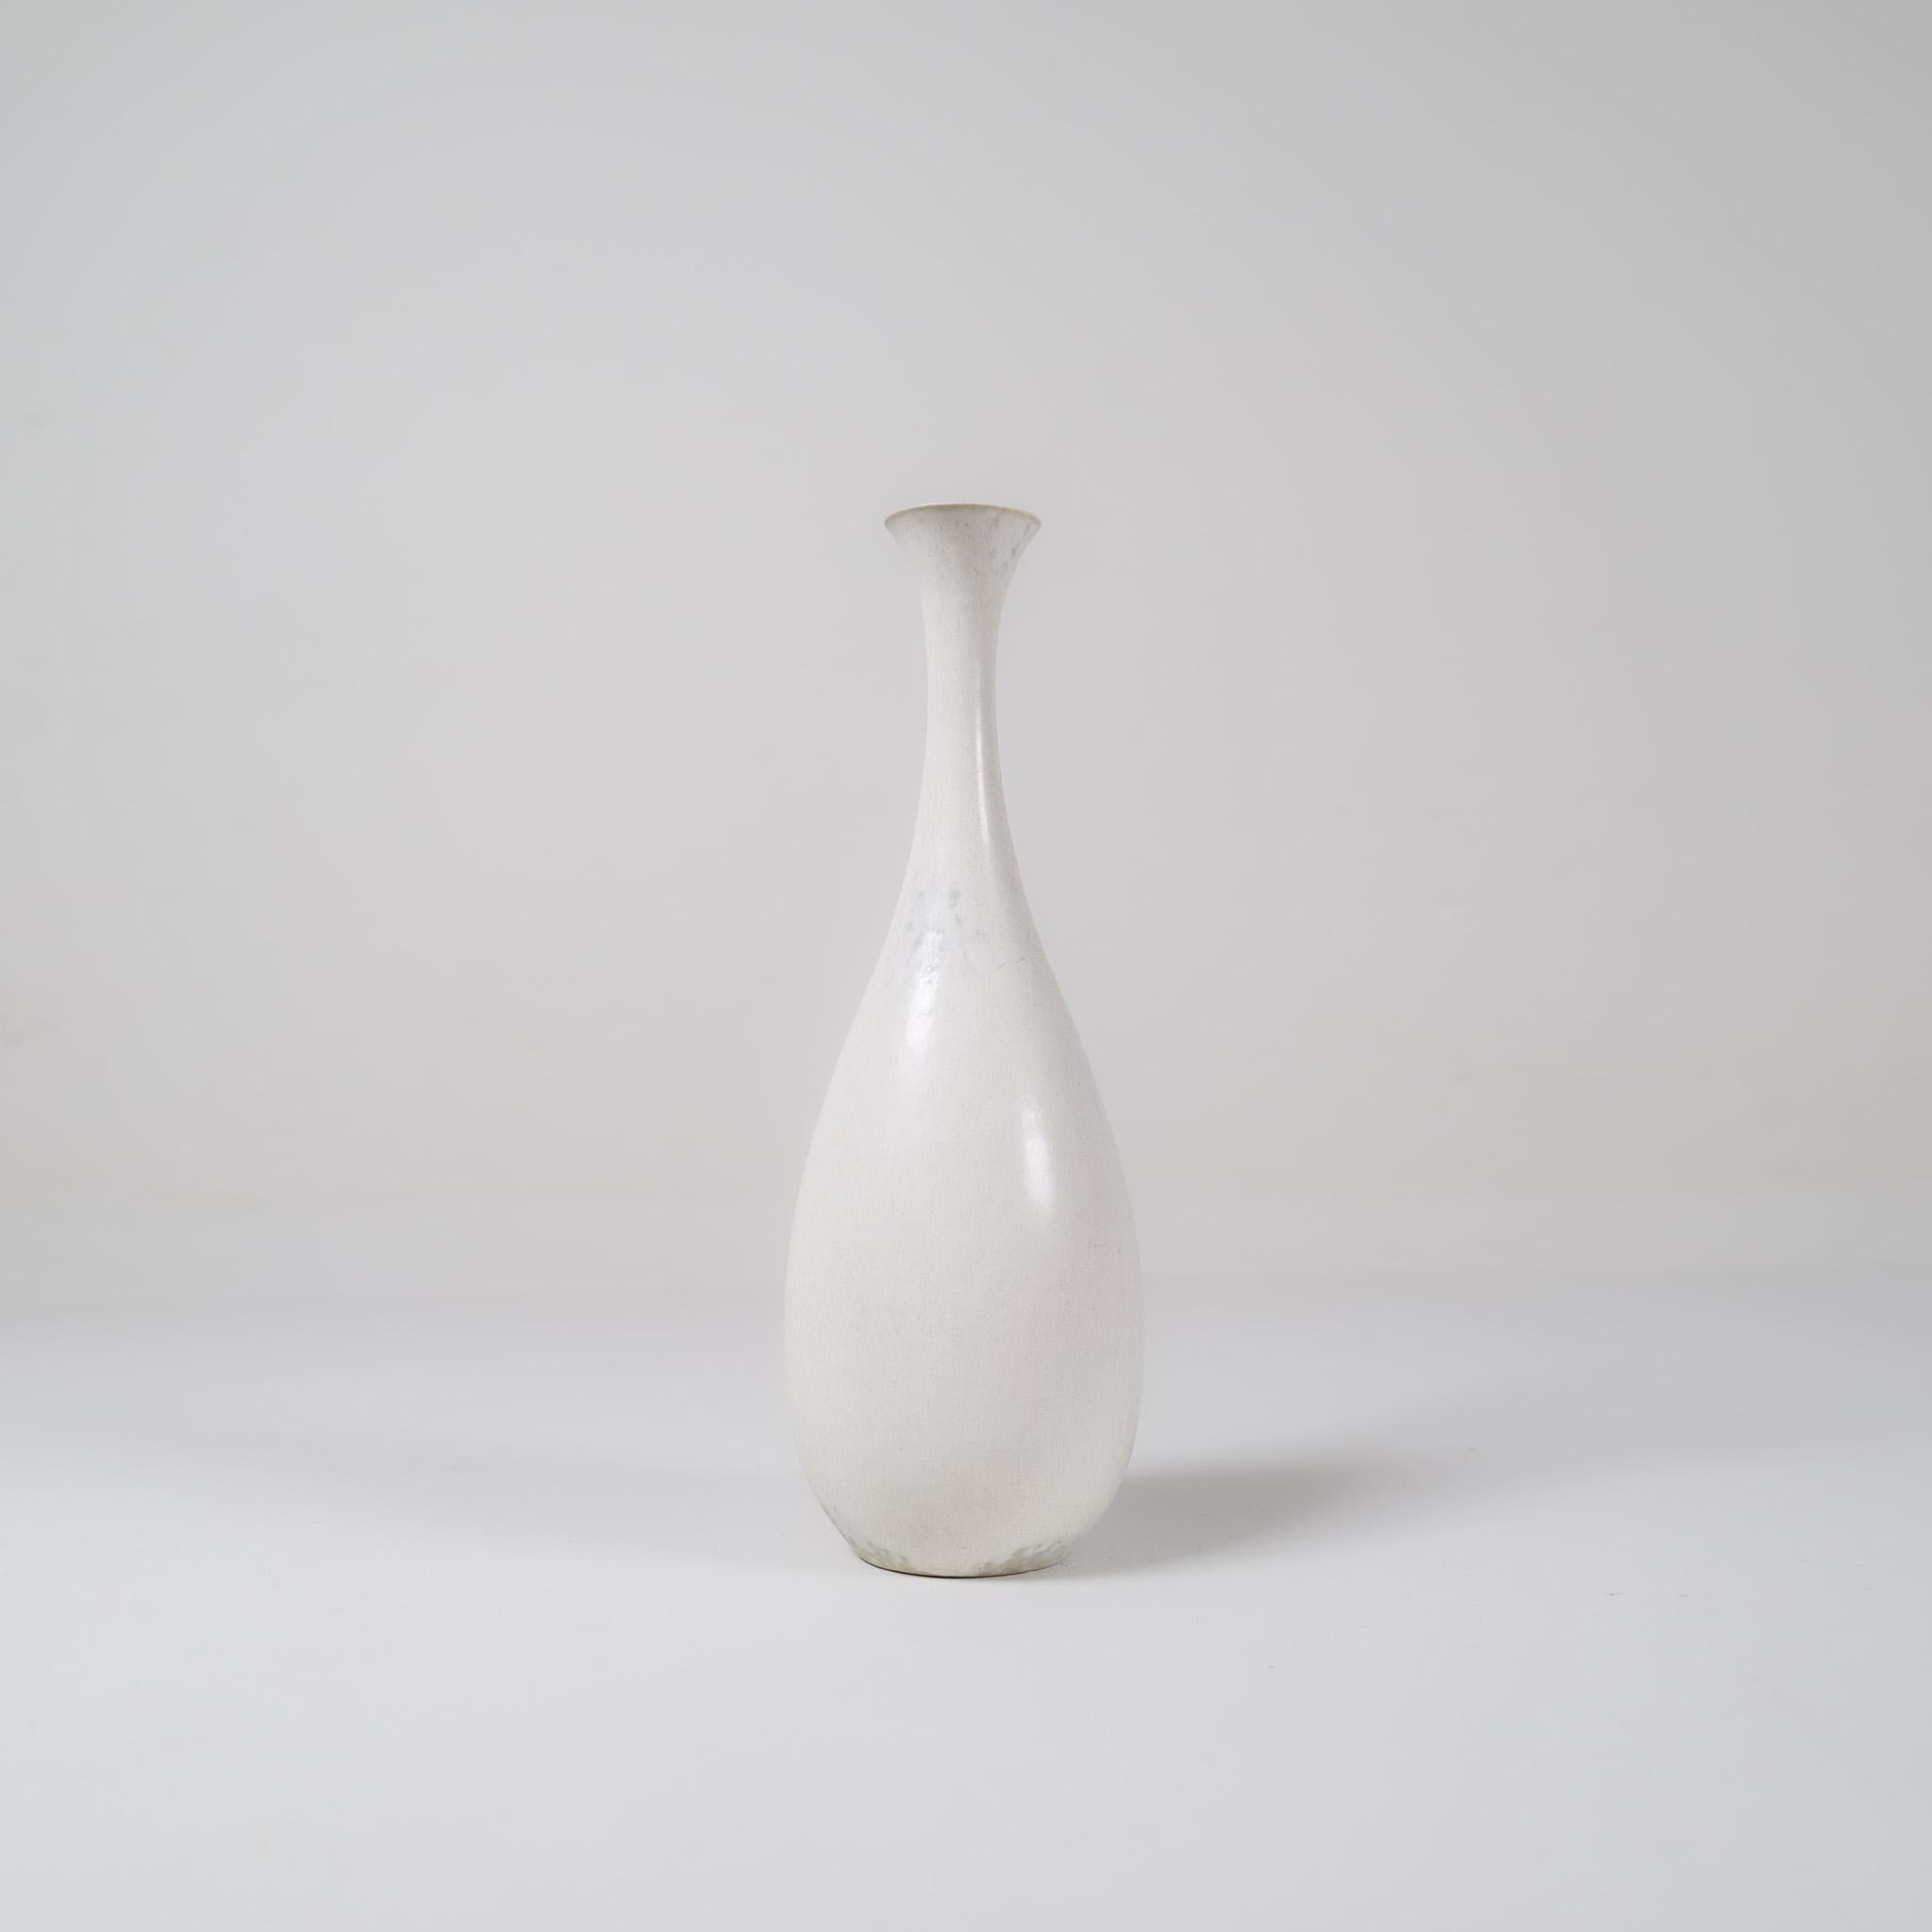 This exceptional vase from Rörstrand and maker/designer Carl Harry Stålhane. Made in Sweden in the midcentury. Its beautiful eggshell glazed combined with its incredible forms makes this an exceptional good piece. 

Very good vintage